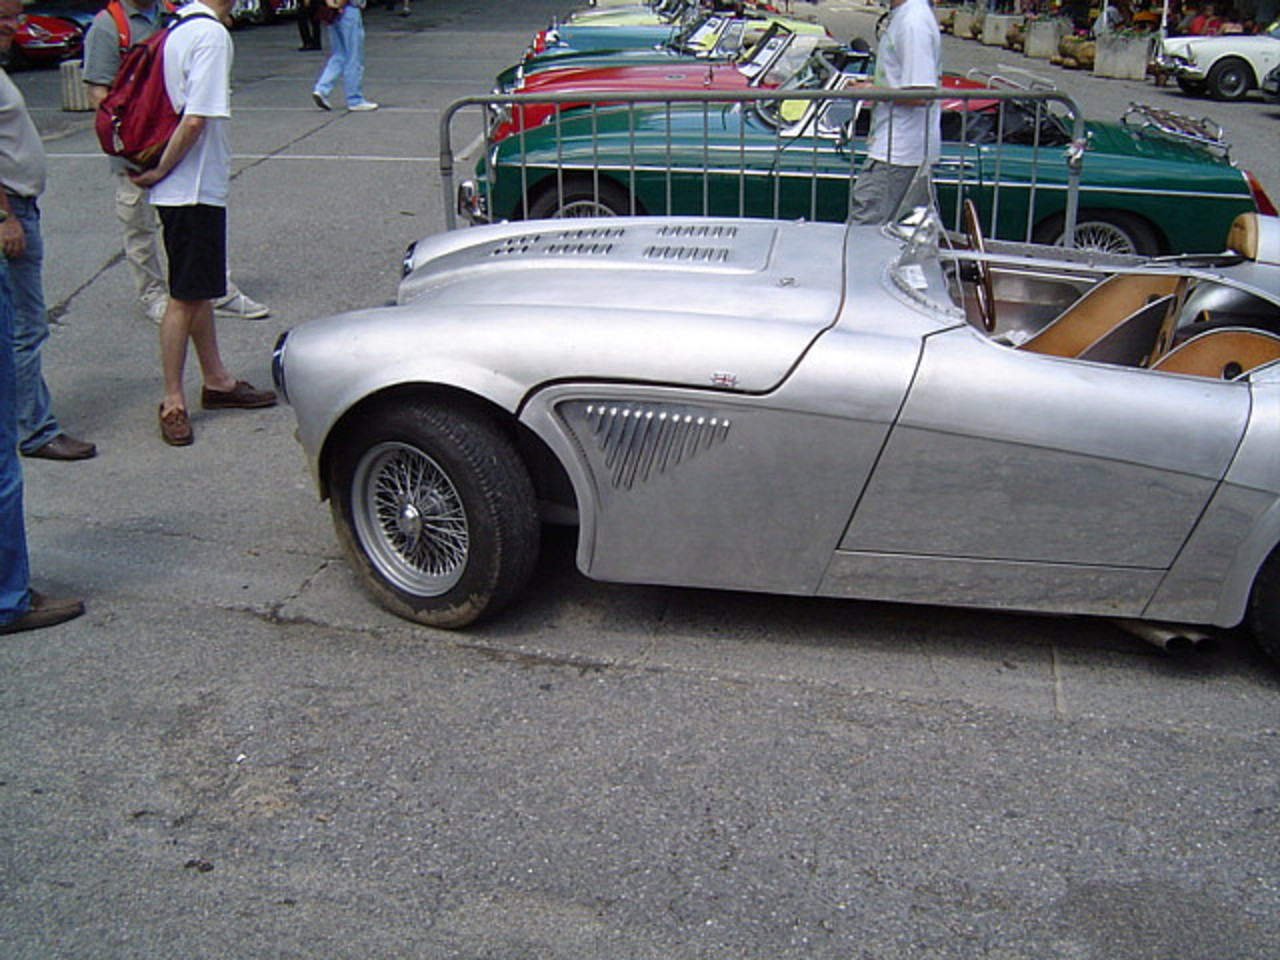 Austin Healey 100/4 Le Mans Replica | Flickr - Photo Sharing!